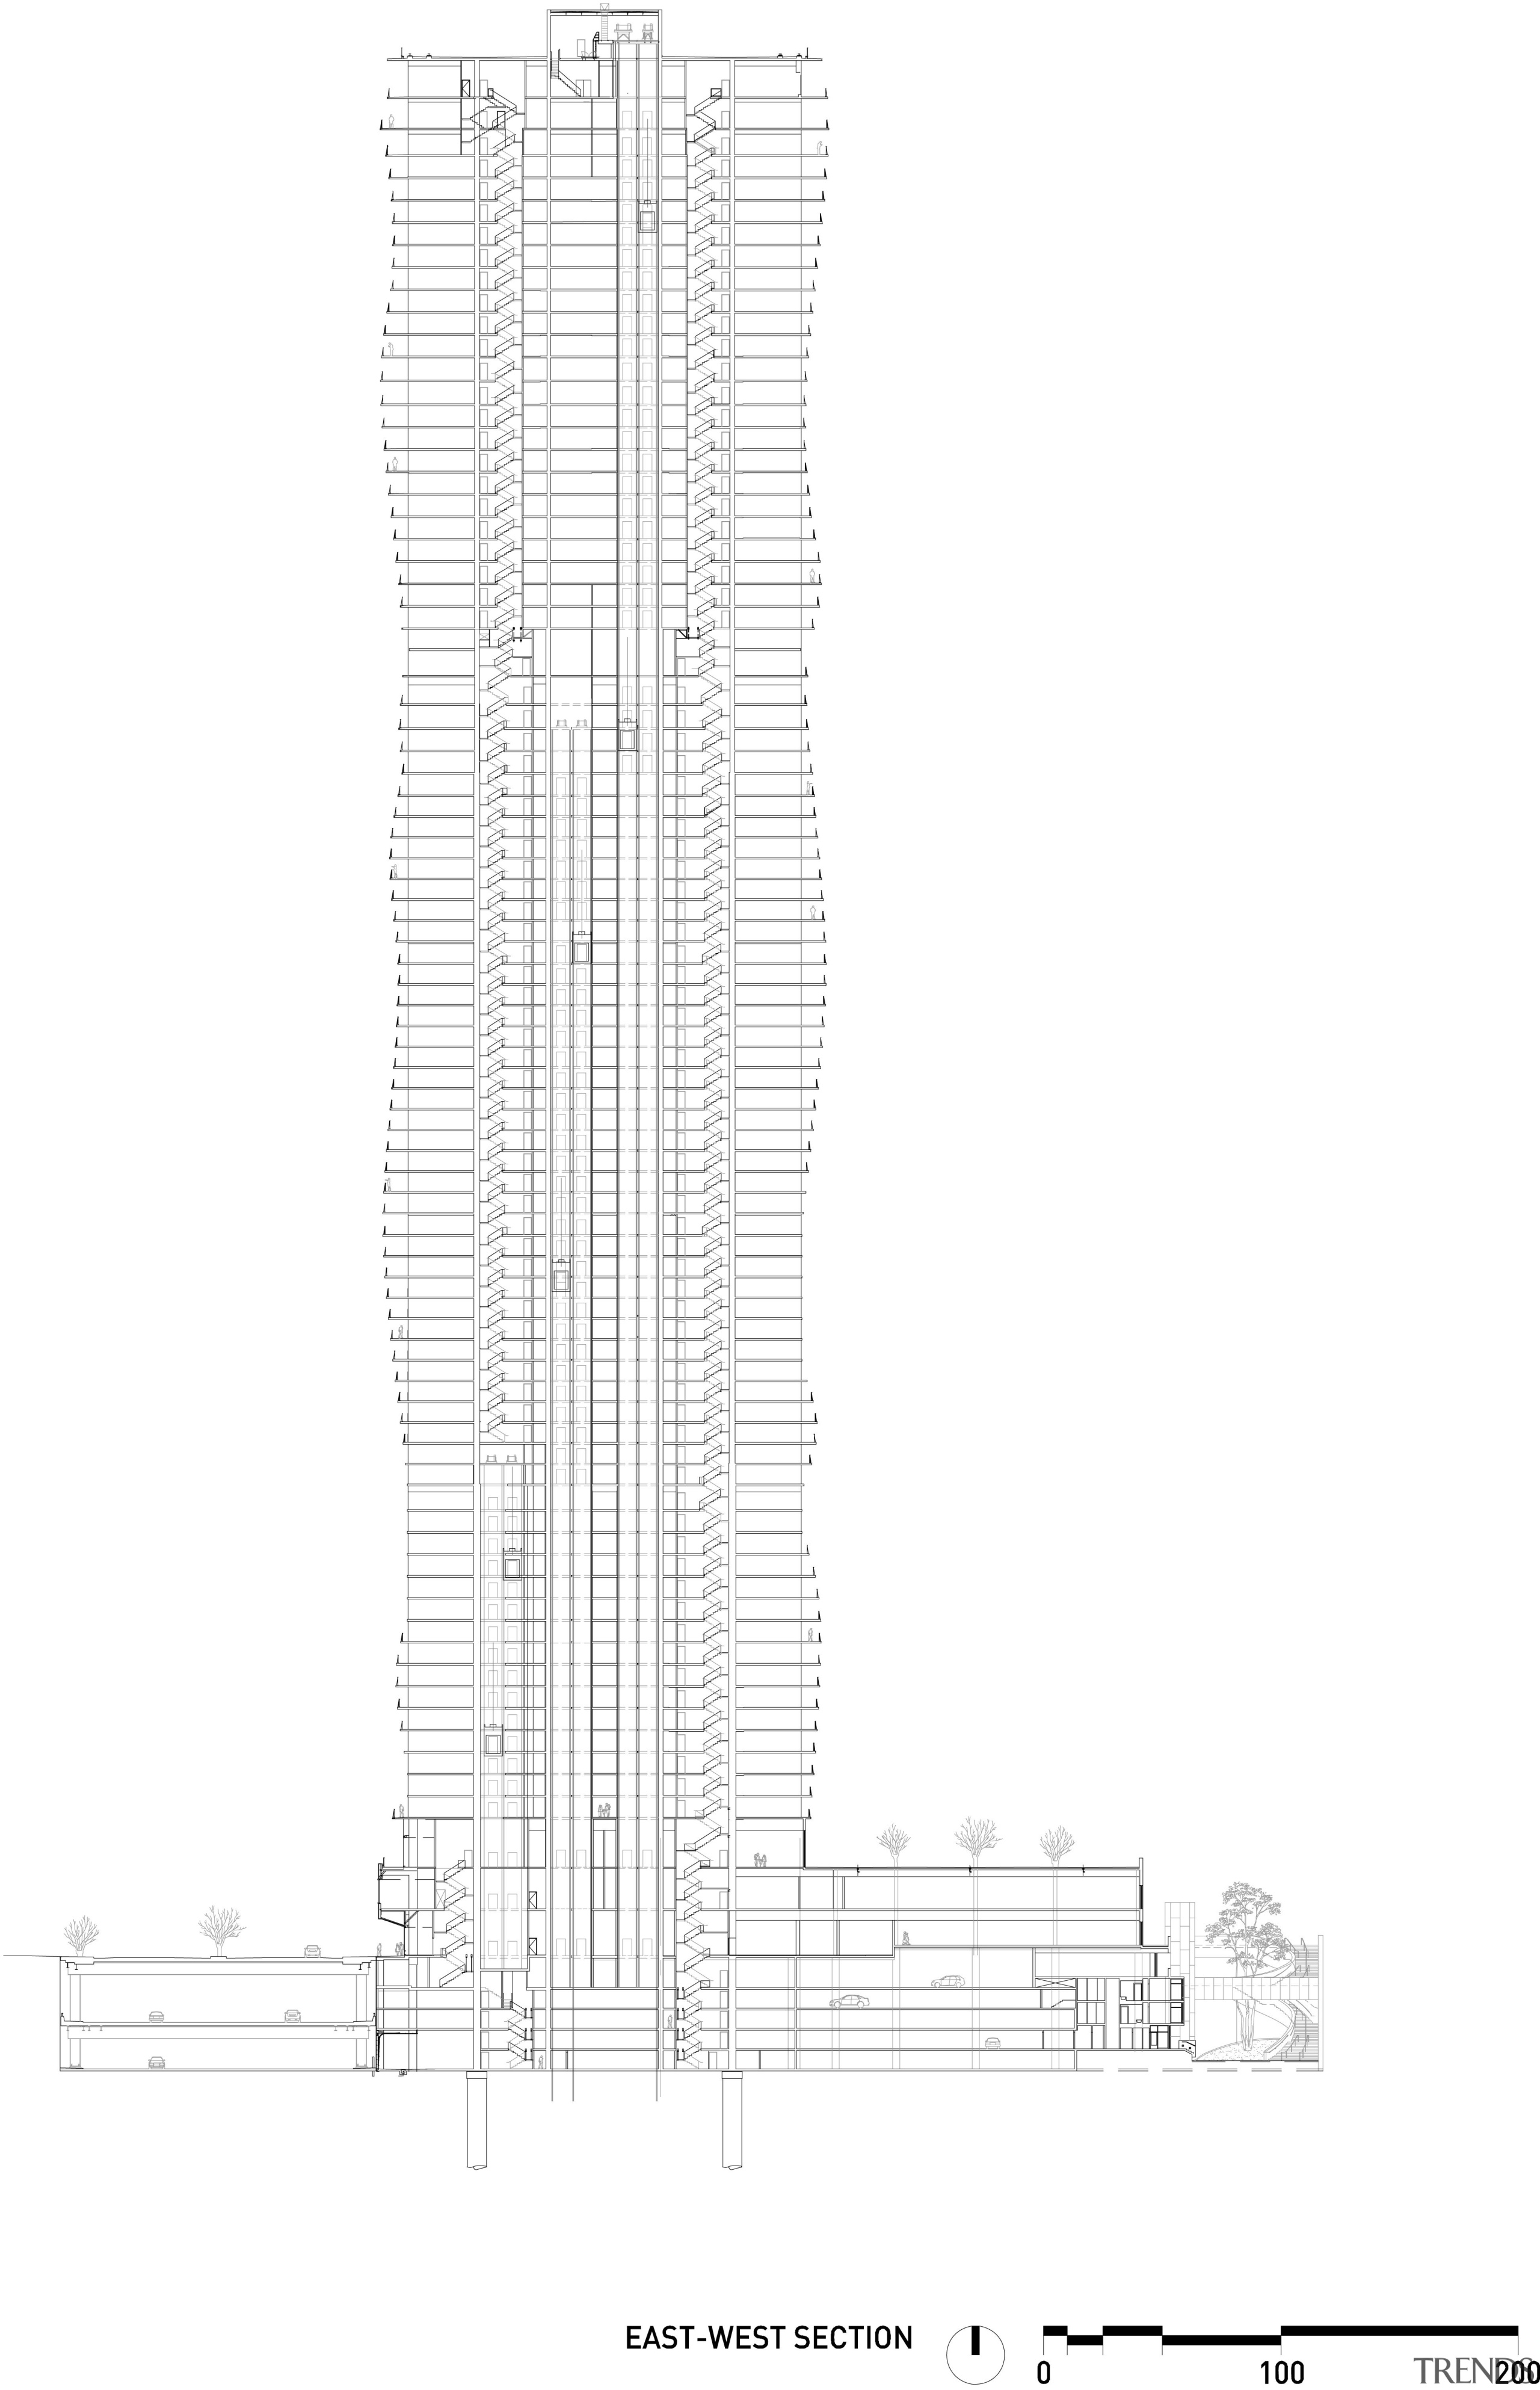 View of architectural drawings of the Aqua Tower architecture, building, design, line, pattern, product design, skyscraper, structure, white